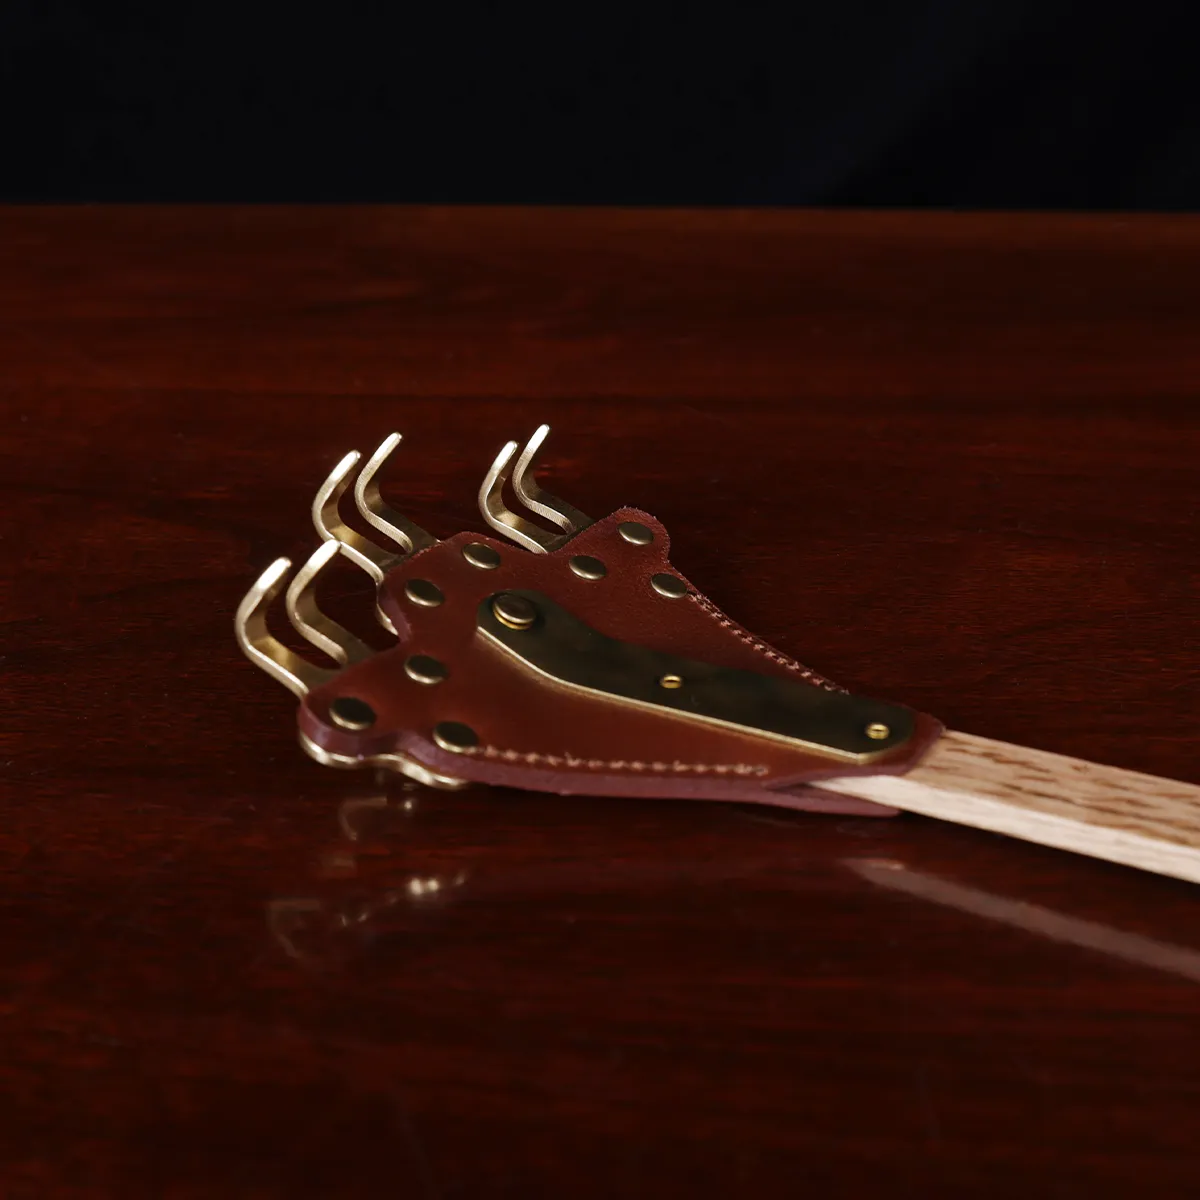 back scratcher made of solid brass on a wooden table with a dark background - scratchers